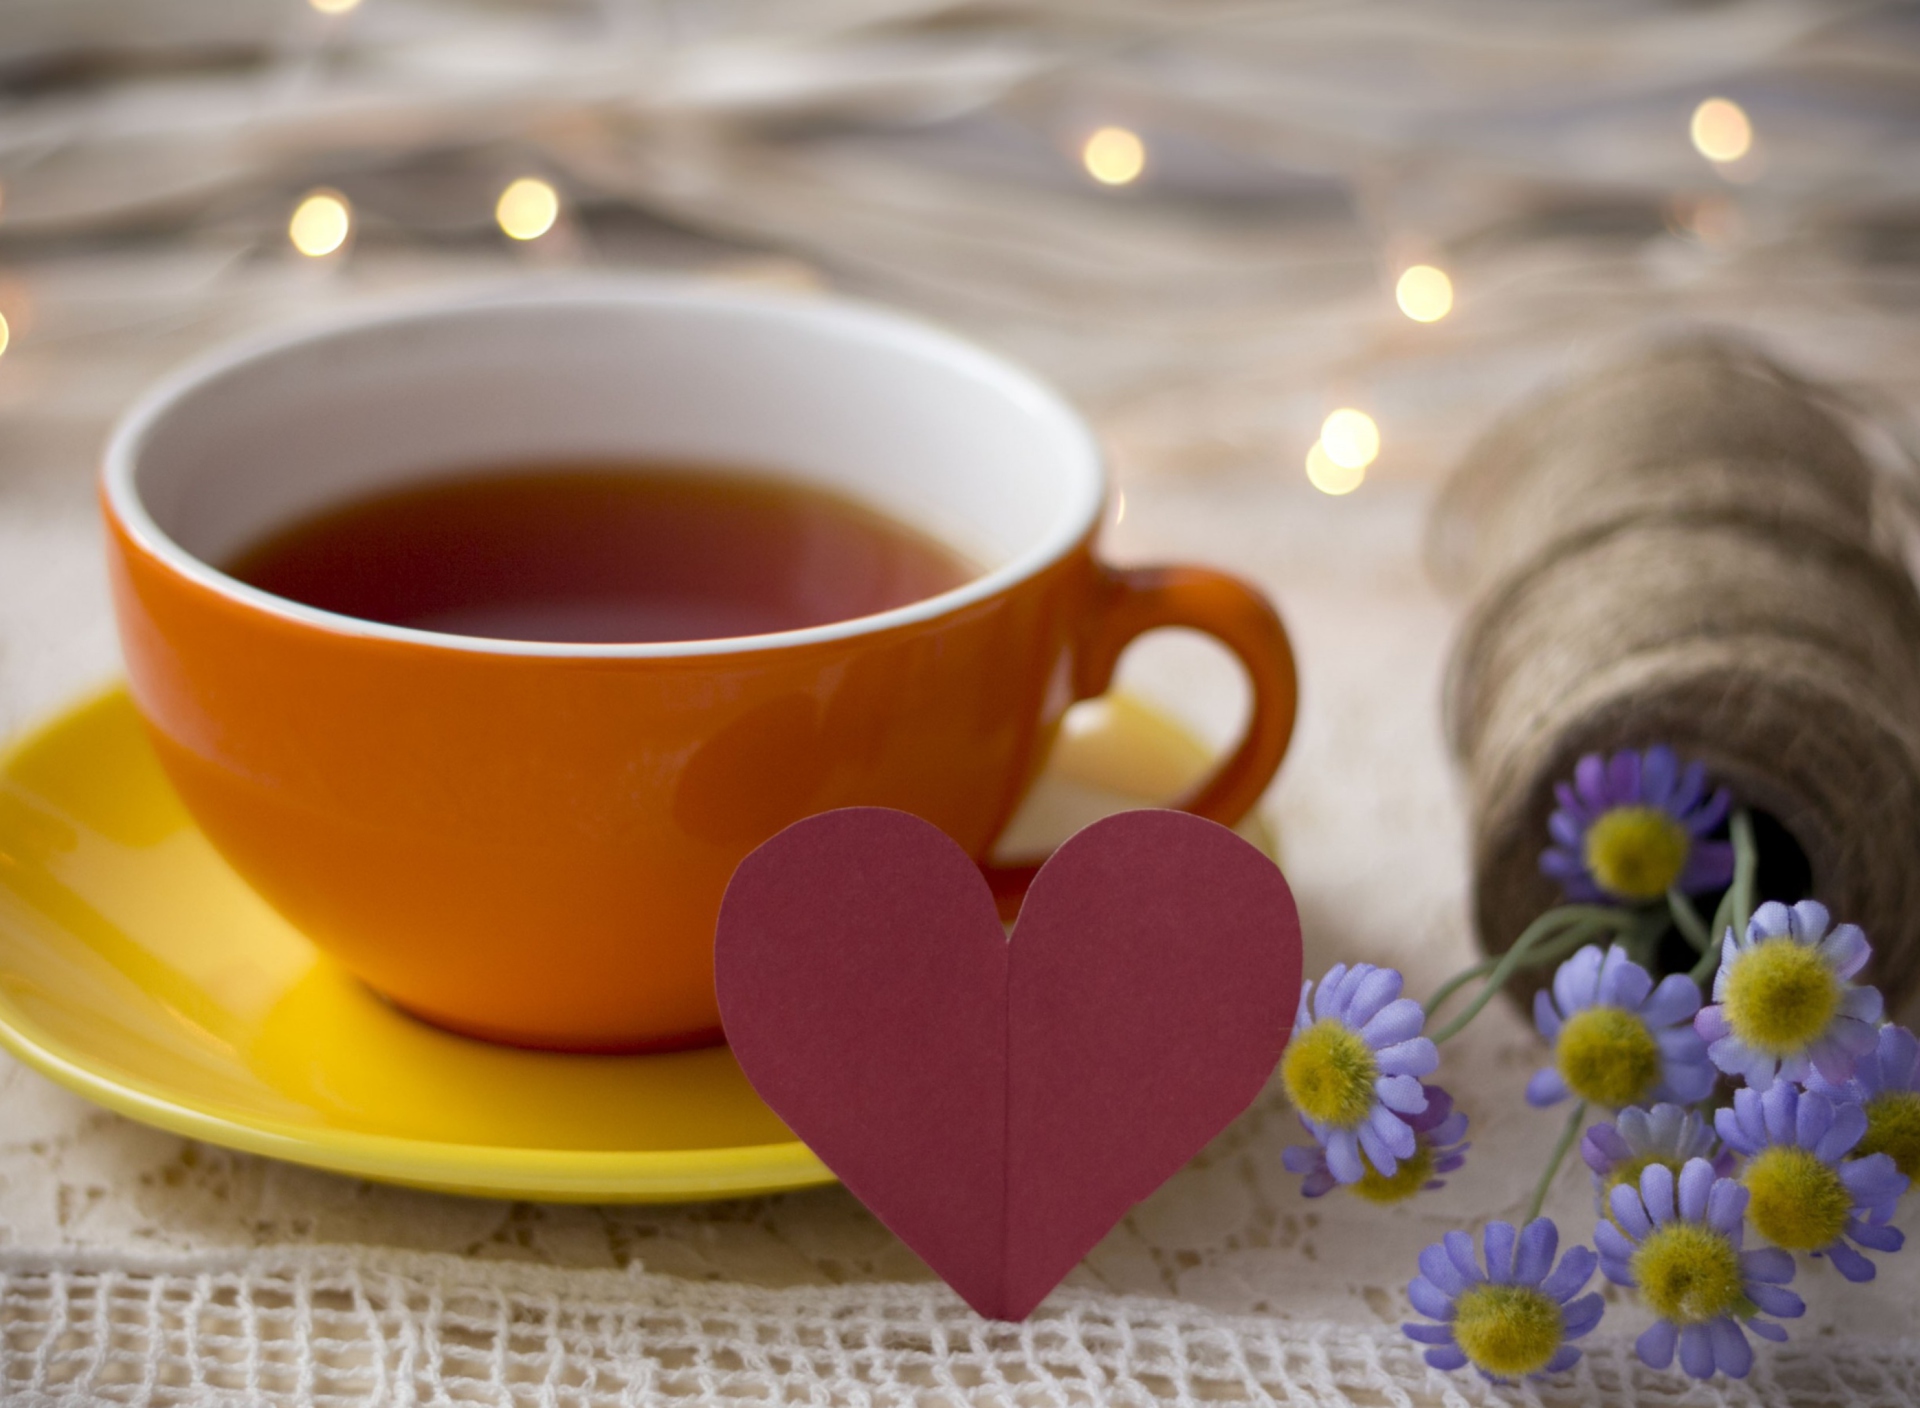 Tea Made With Love wallpaper 1920x1408